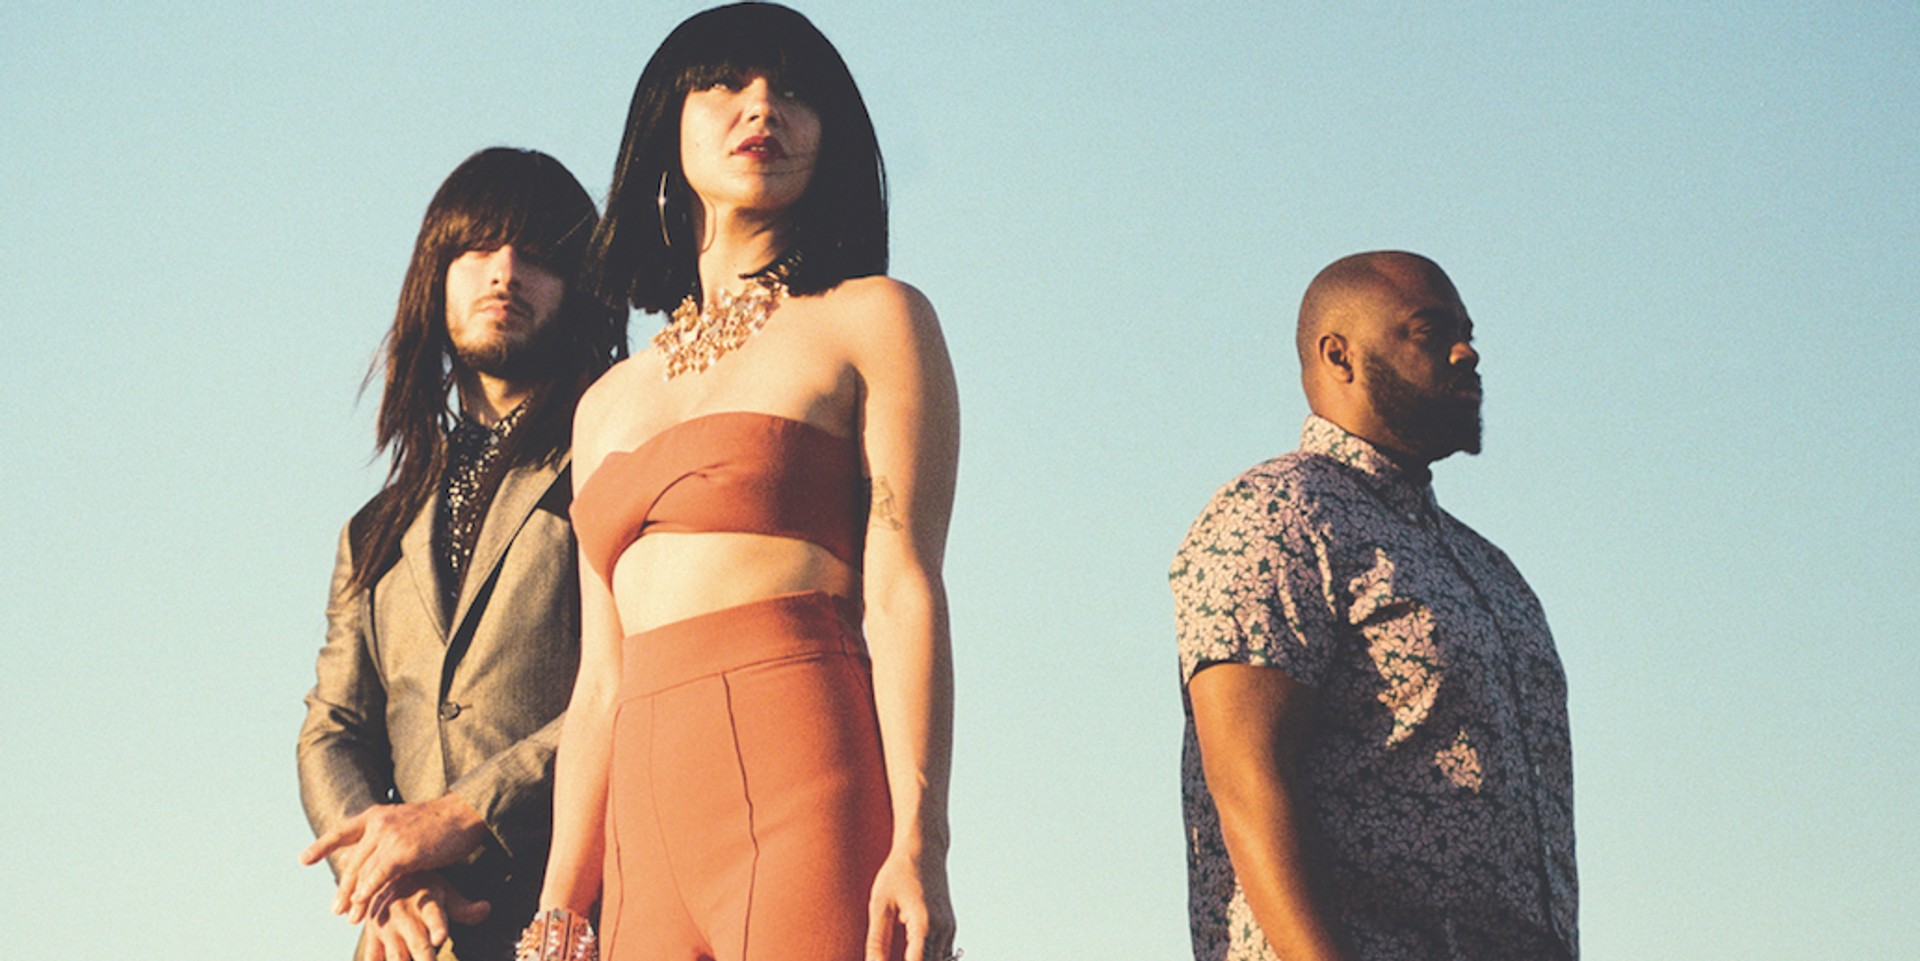 Khruangbin's Singapore show is now sold out